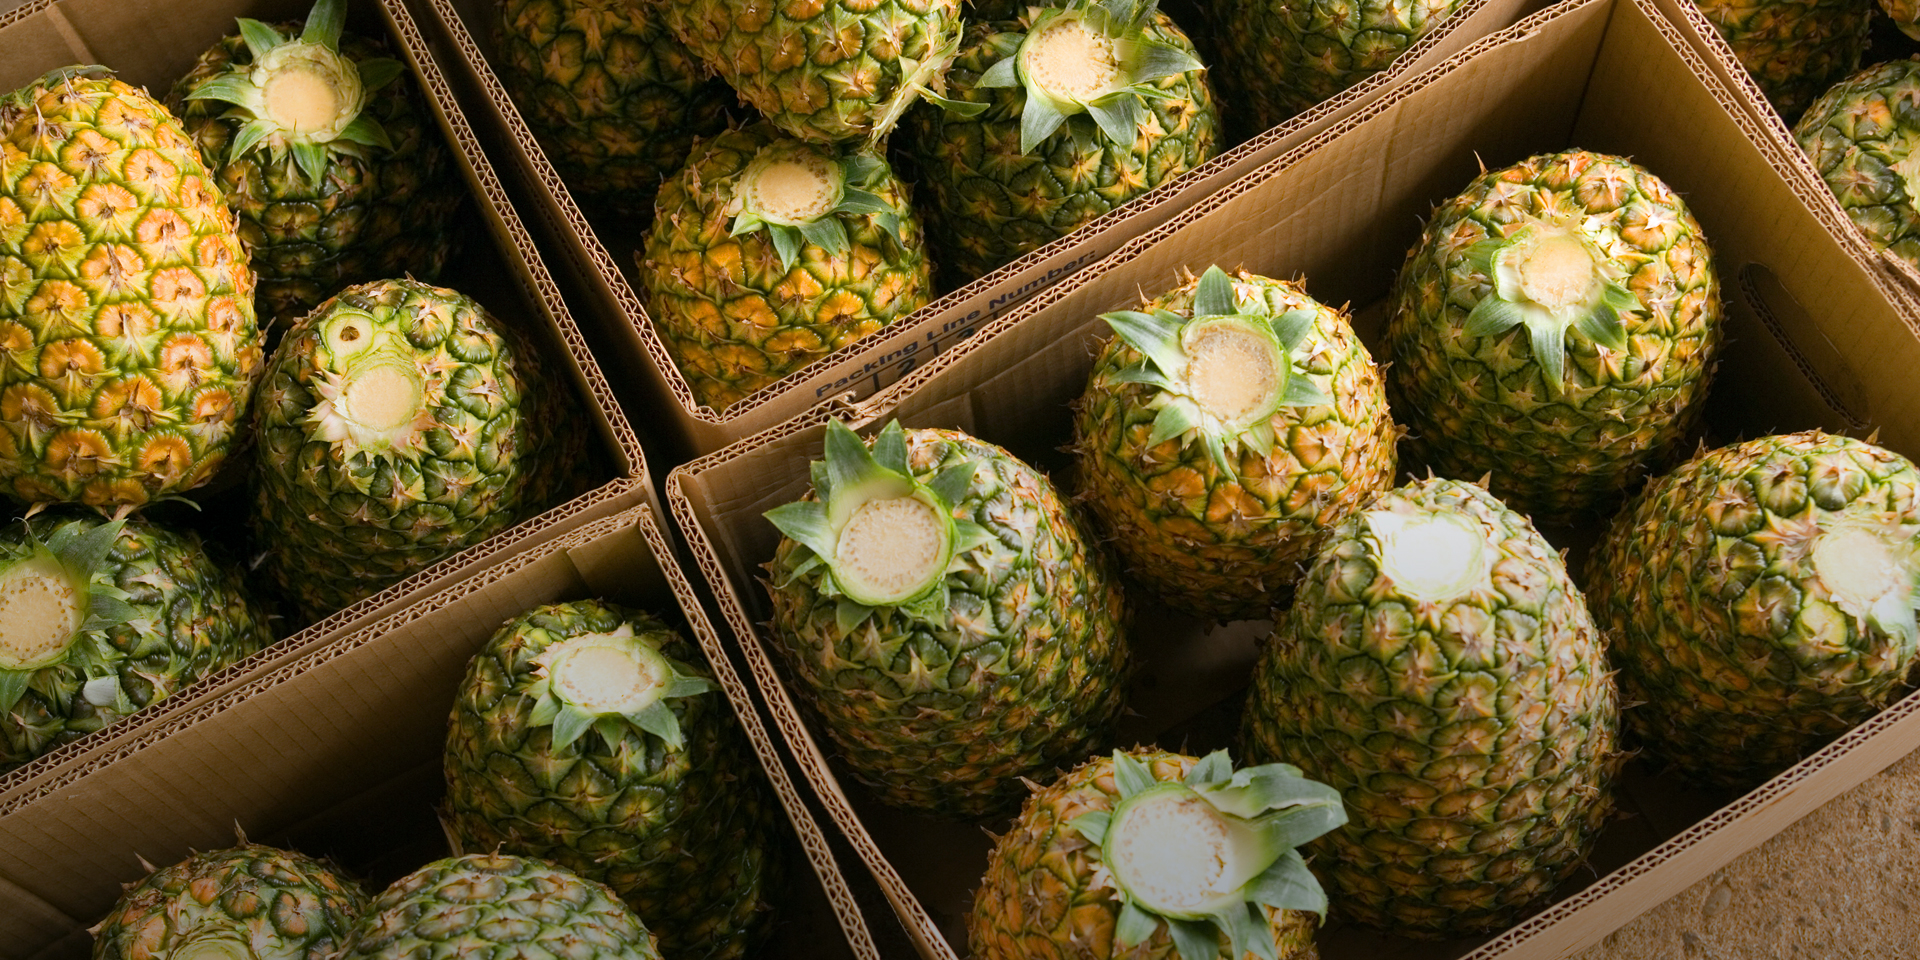 Overhead image of pineapples stored in cardboard boxes with their crowns cut off.